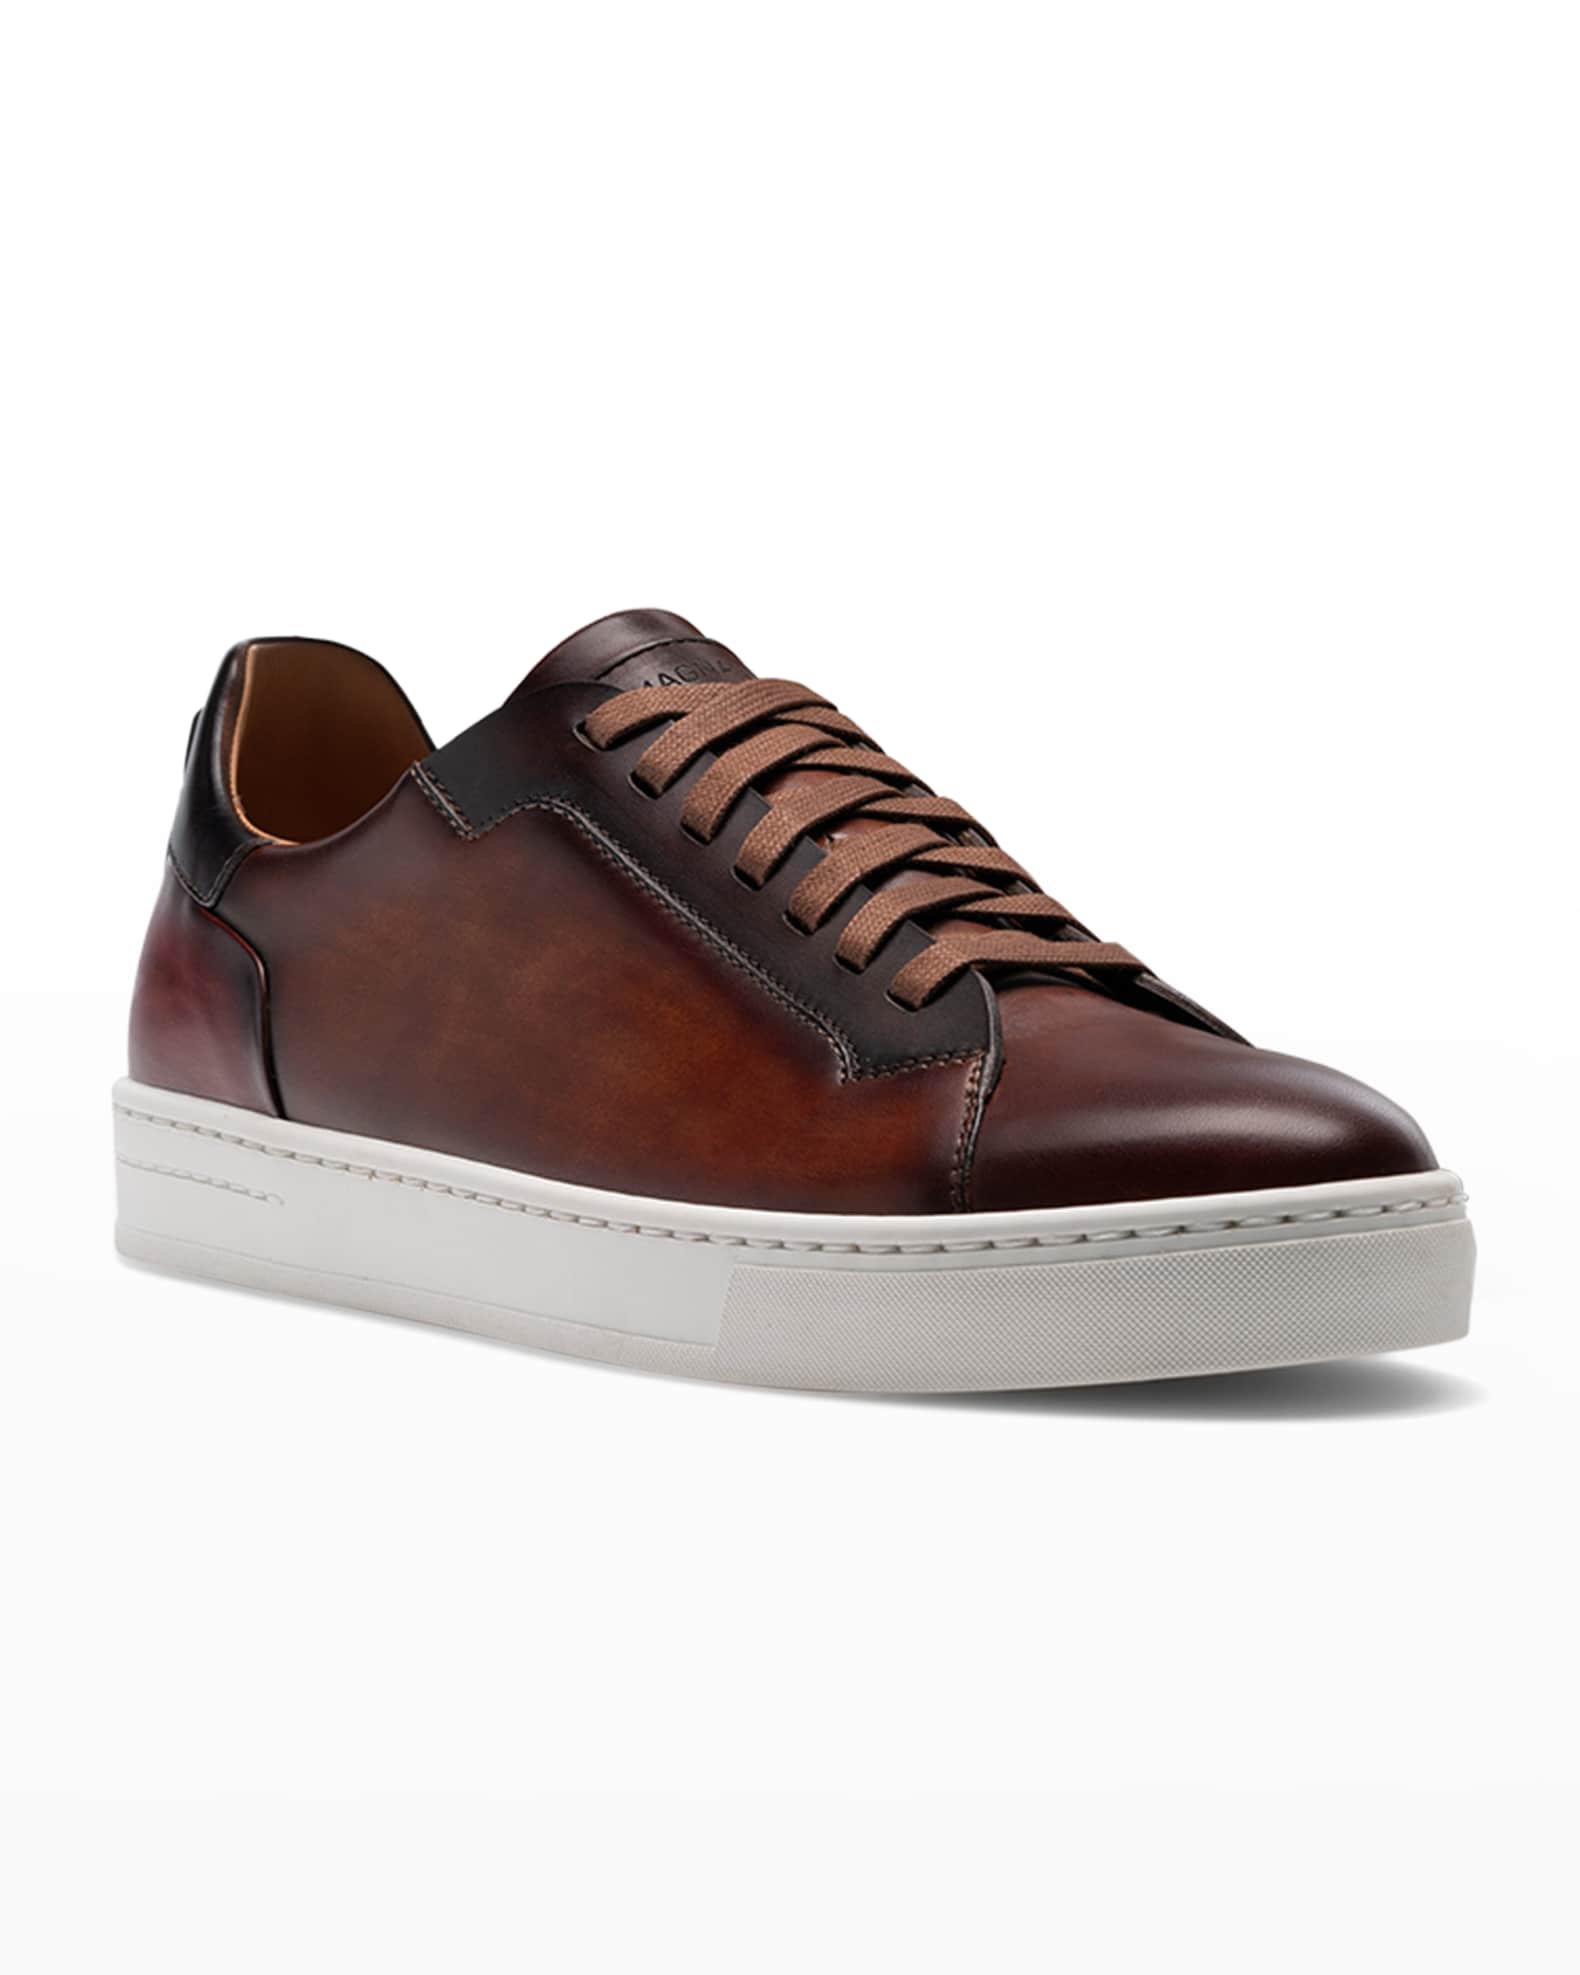 Magnanni Men's Amadeo Burnished Leather Low-Top Sneakers | Neiman Marcus